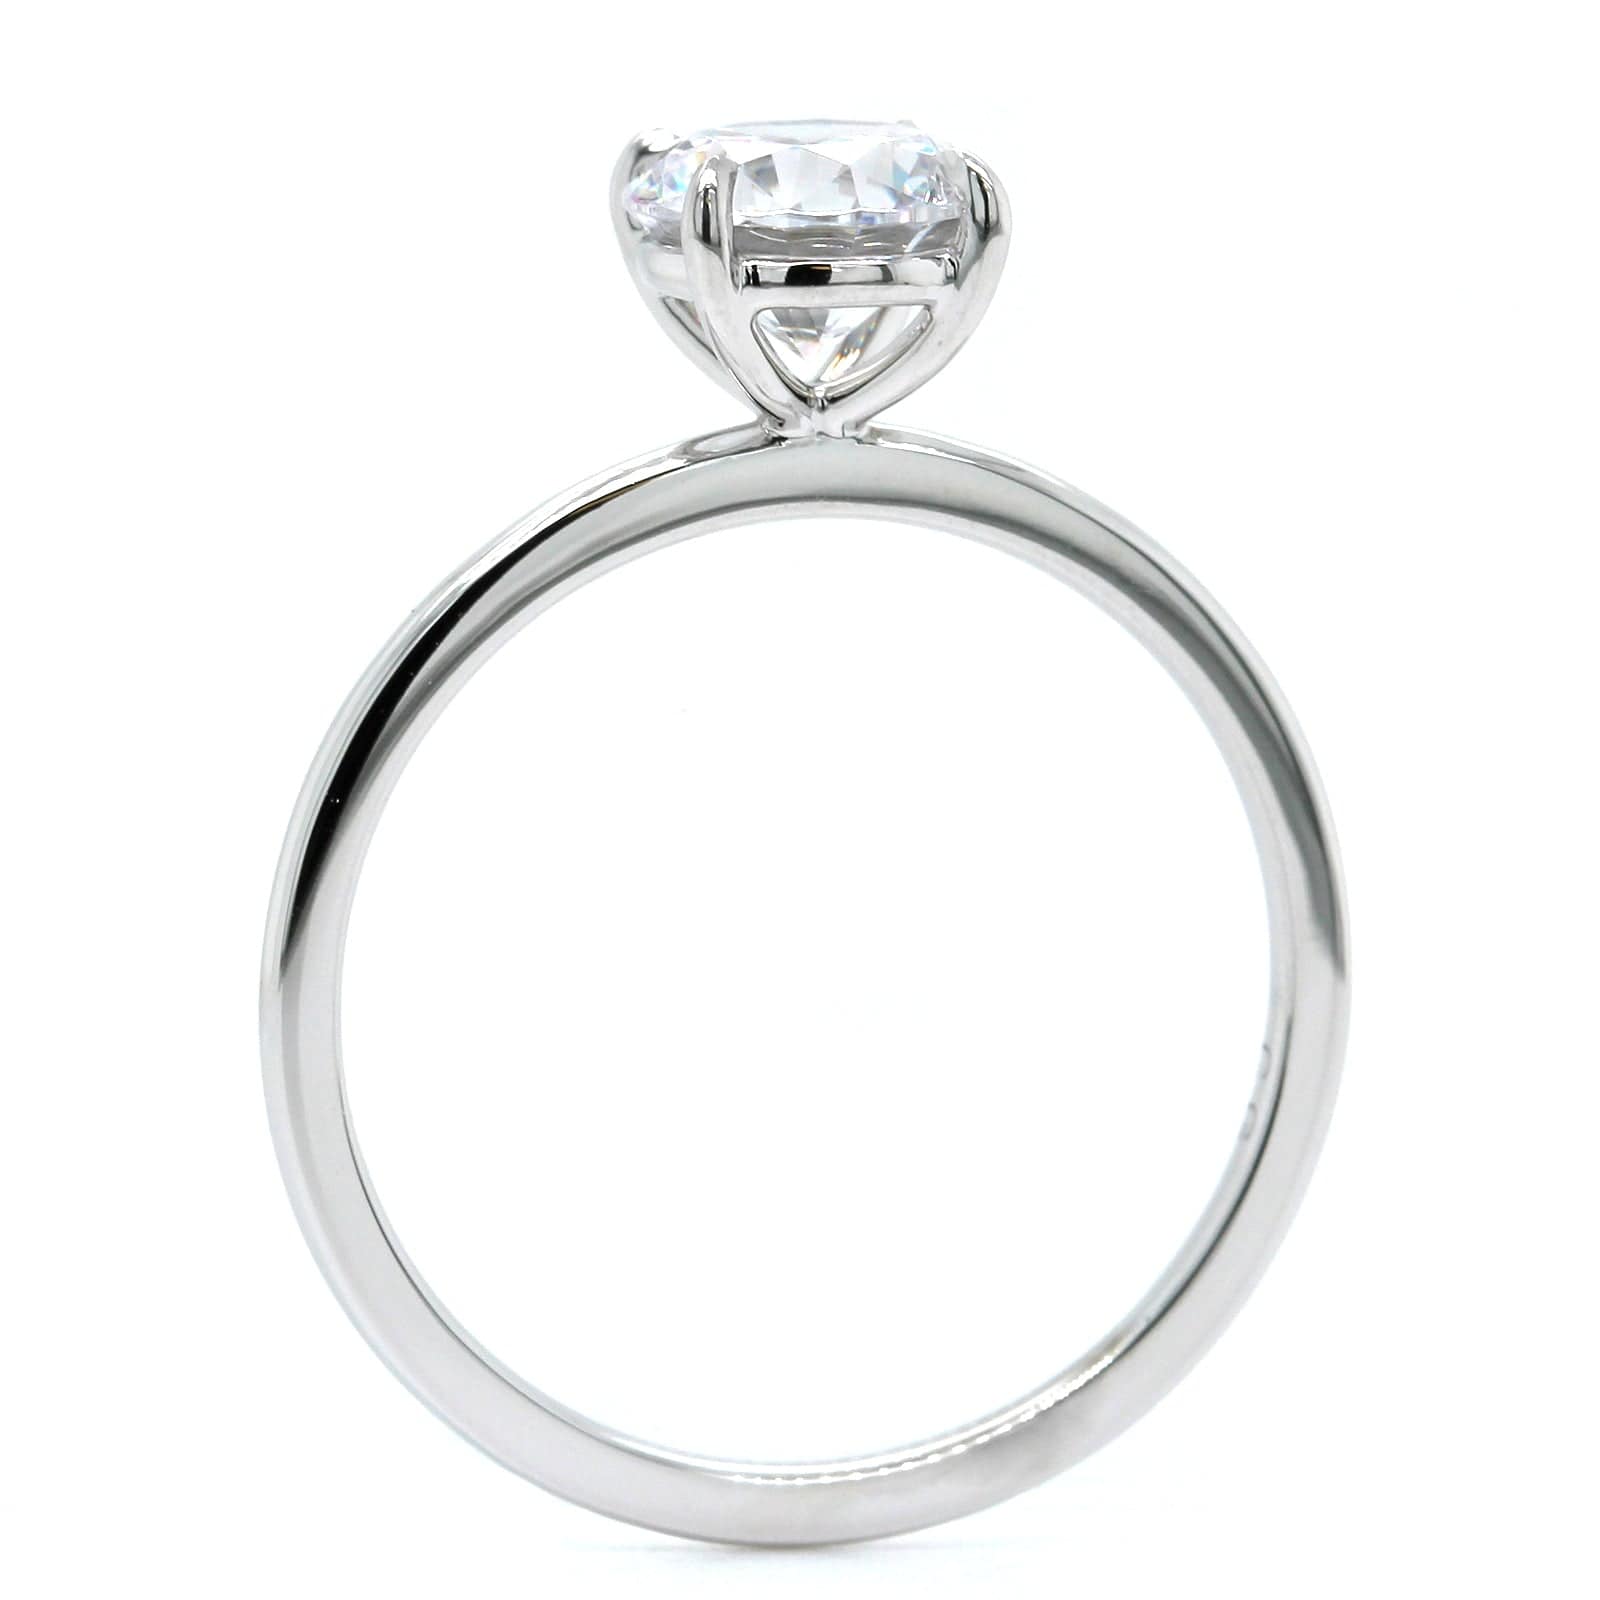 Platinum Round 4 Prong Solitaire Engagement Ring Setting, Platinum, Long's Jewelers